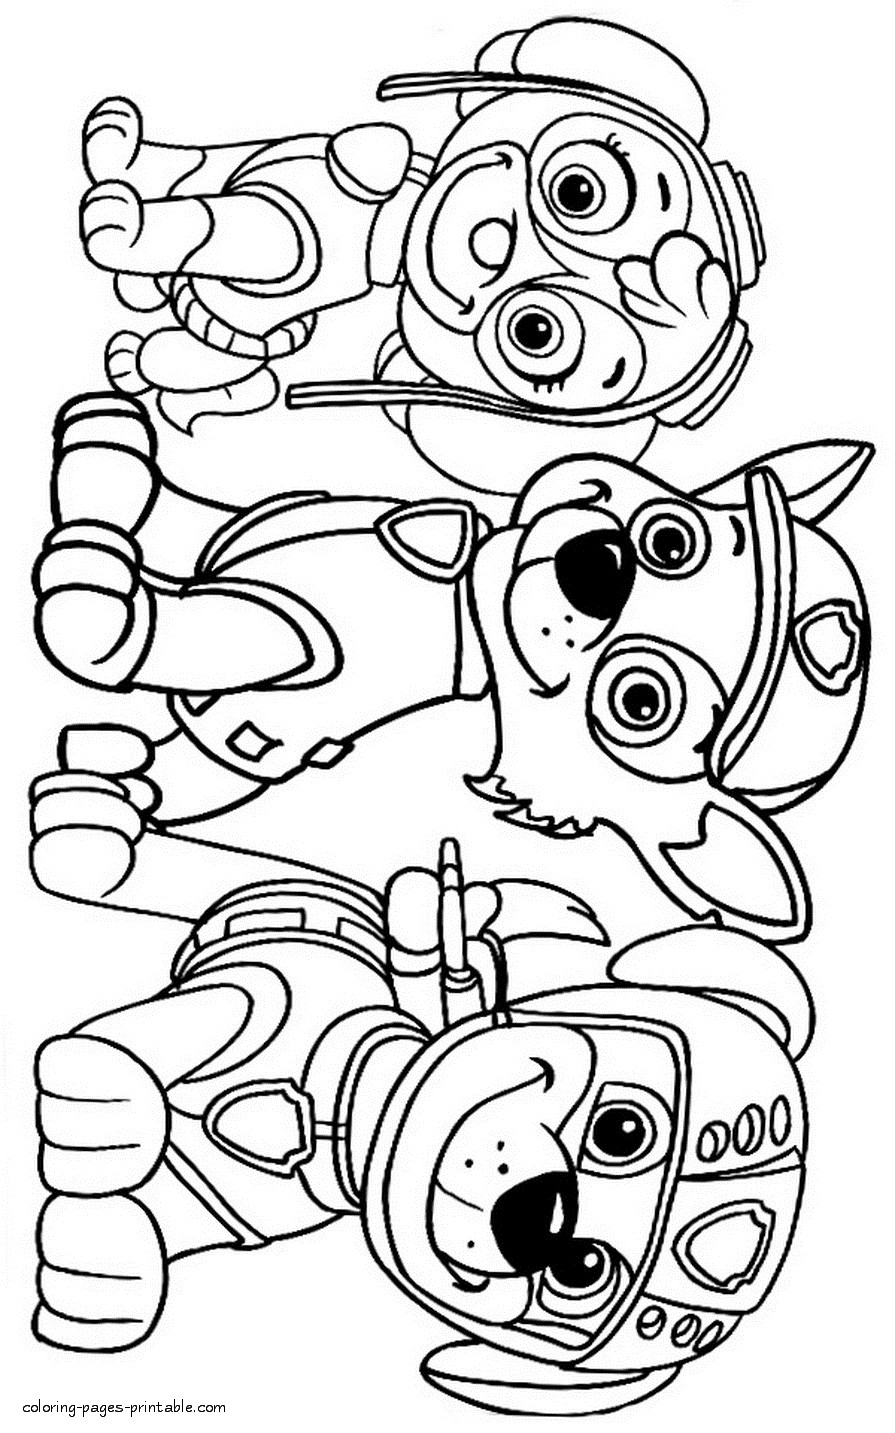 Paw Patrol Badges Coloring Pages at GetColorings.com ...